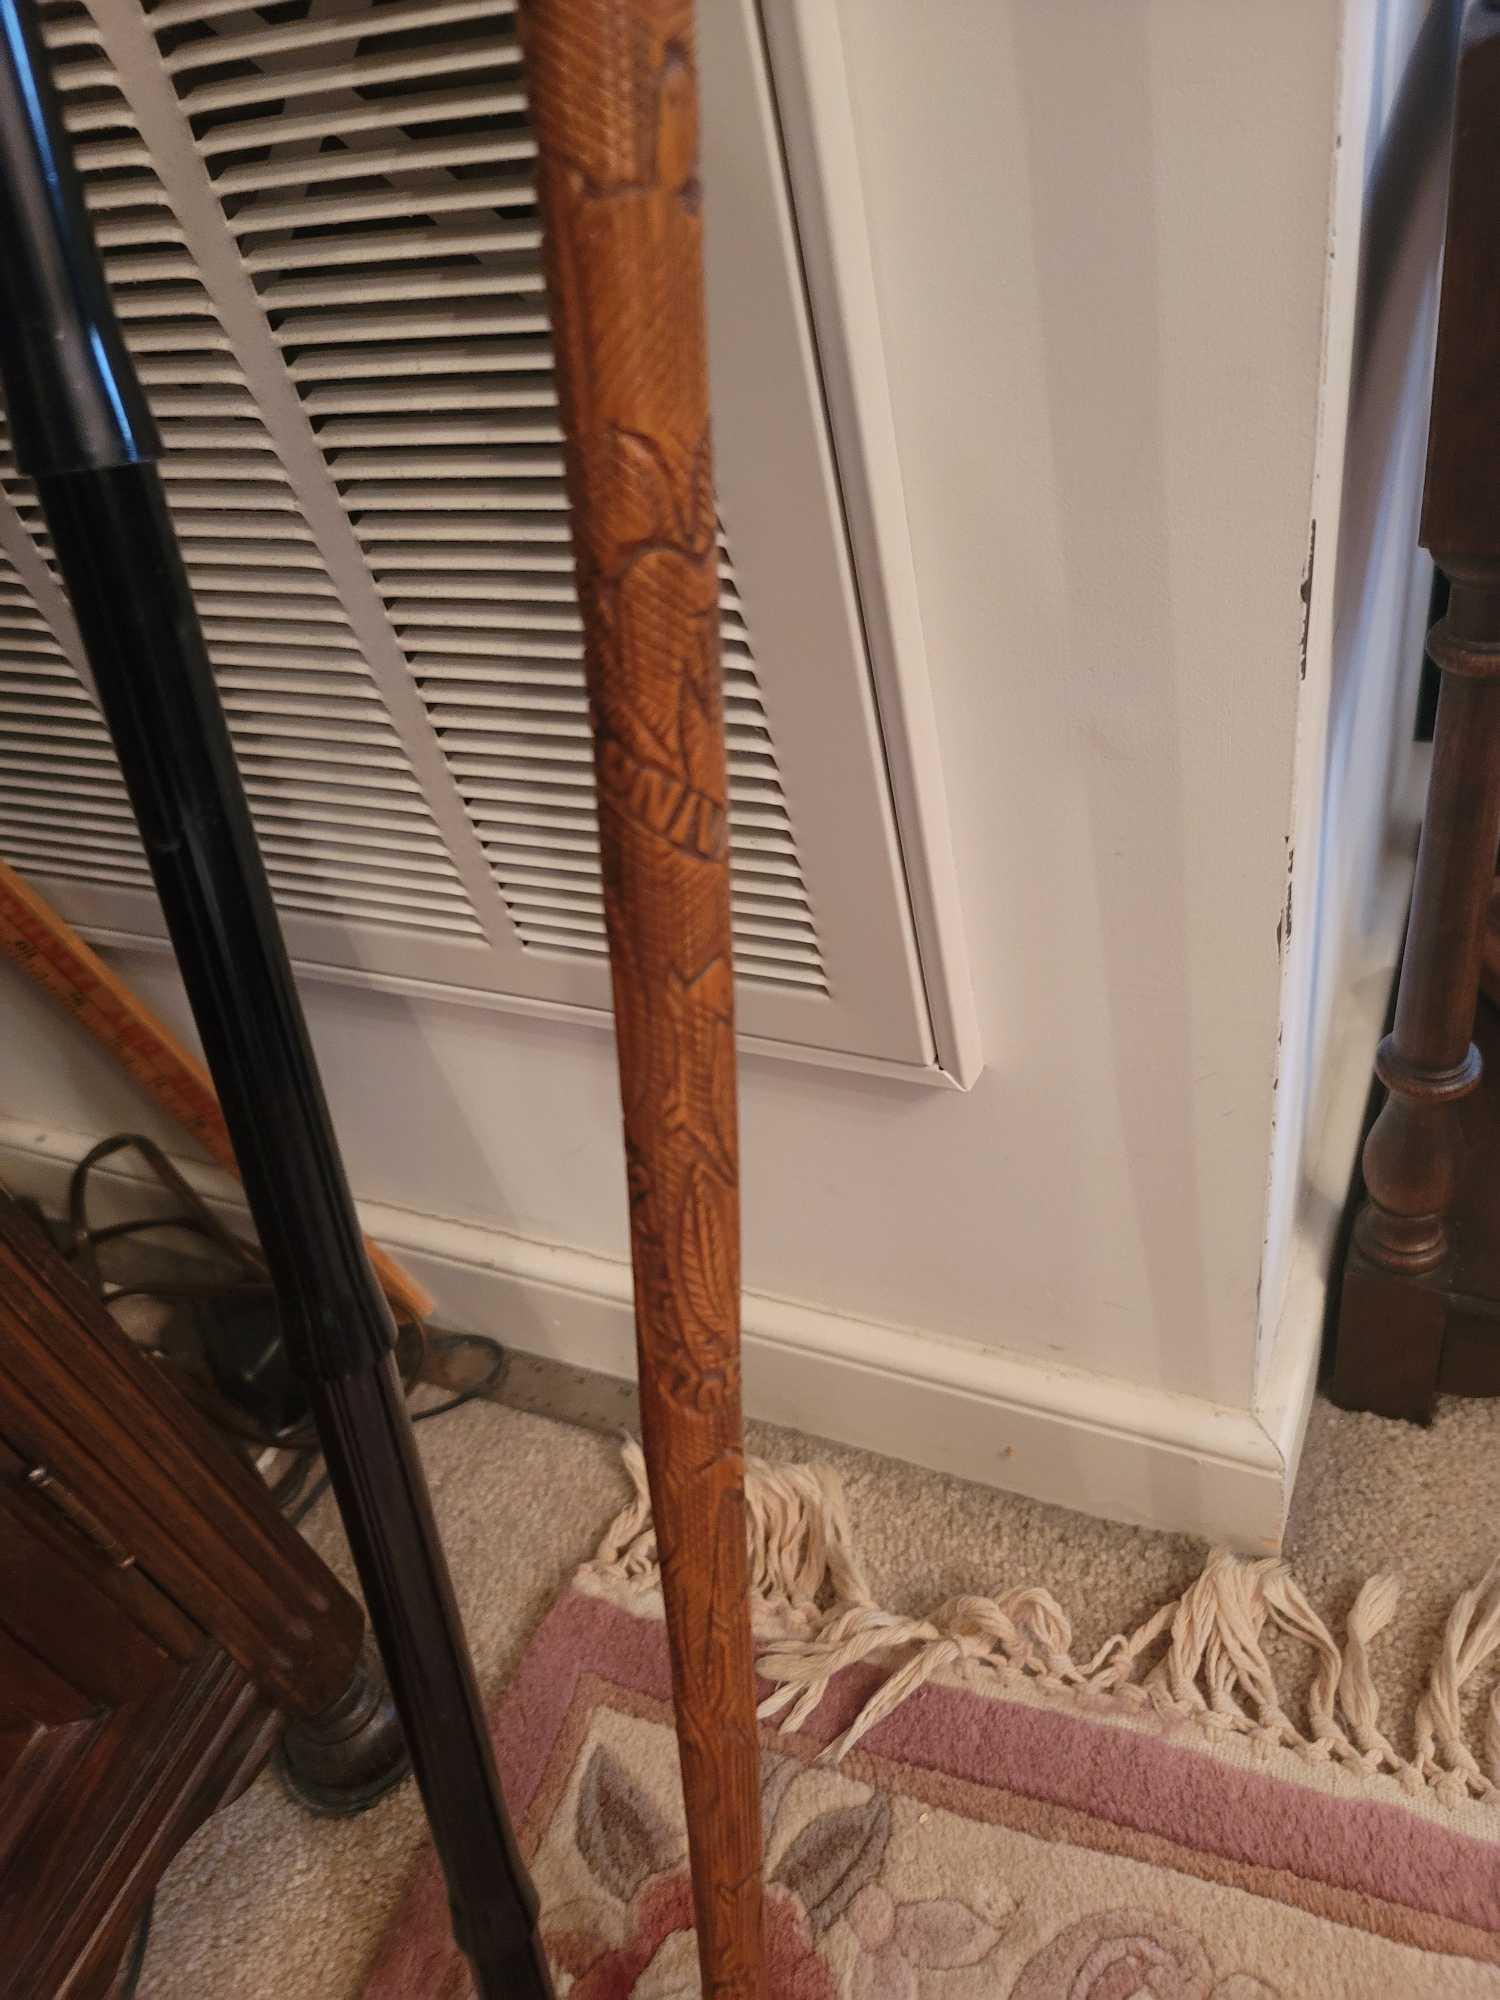 (DR) LOT OF 3 ASSORTED CANES. INCLUDES 2 A CARVED WOODEN CANE WITH NAMES OF U.S. PRESIDENTS, A BLACK